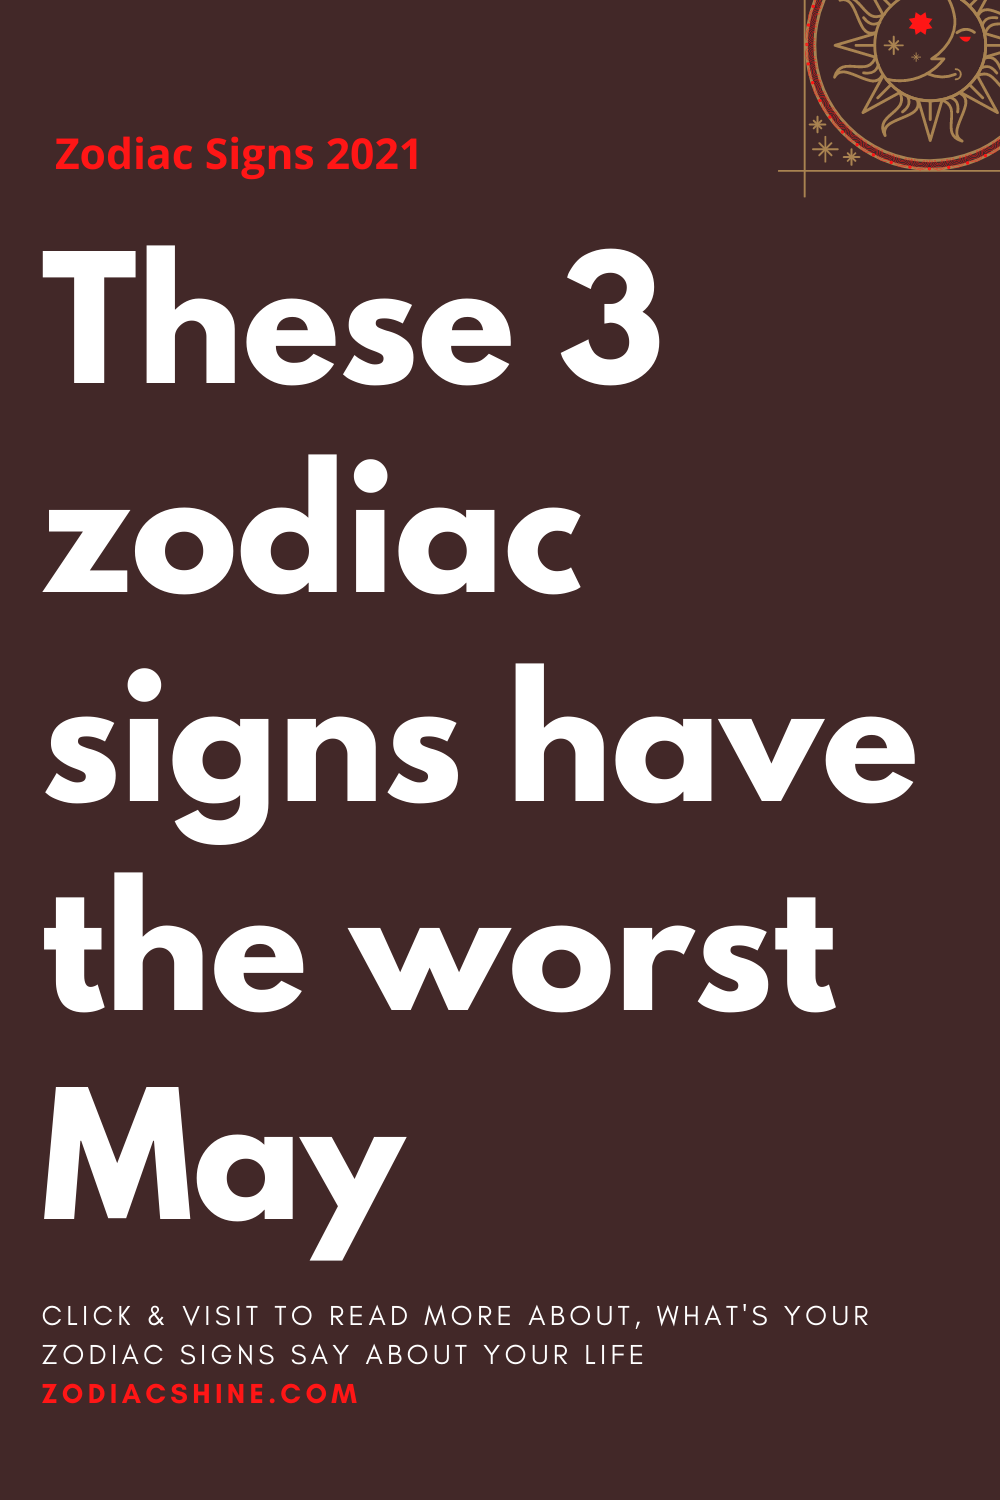 These 3 zodiac signs have the worst May 